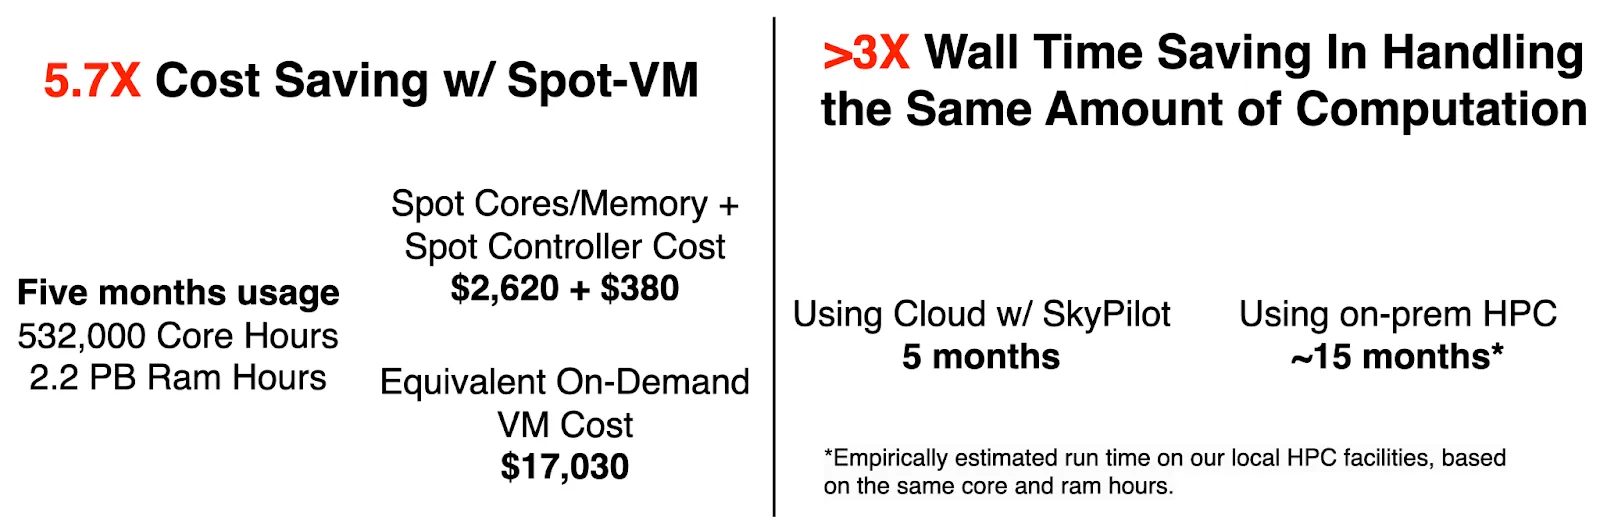 Cost and wall time saving based on our five-month experience using spot-VM on GCP with SkyPilot